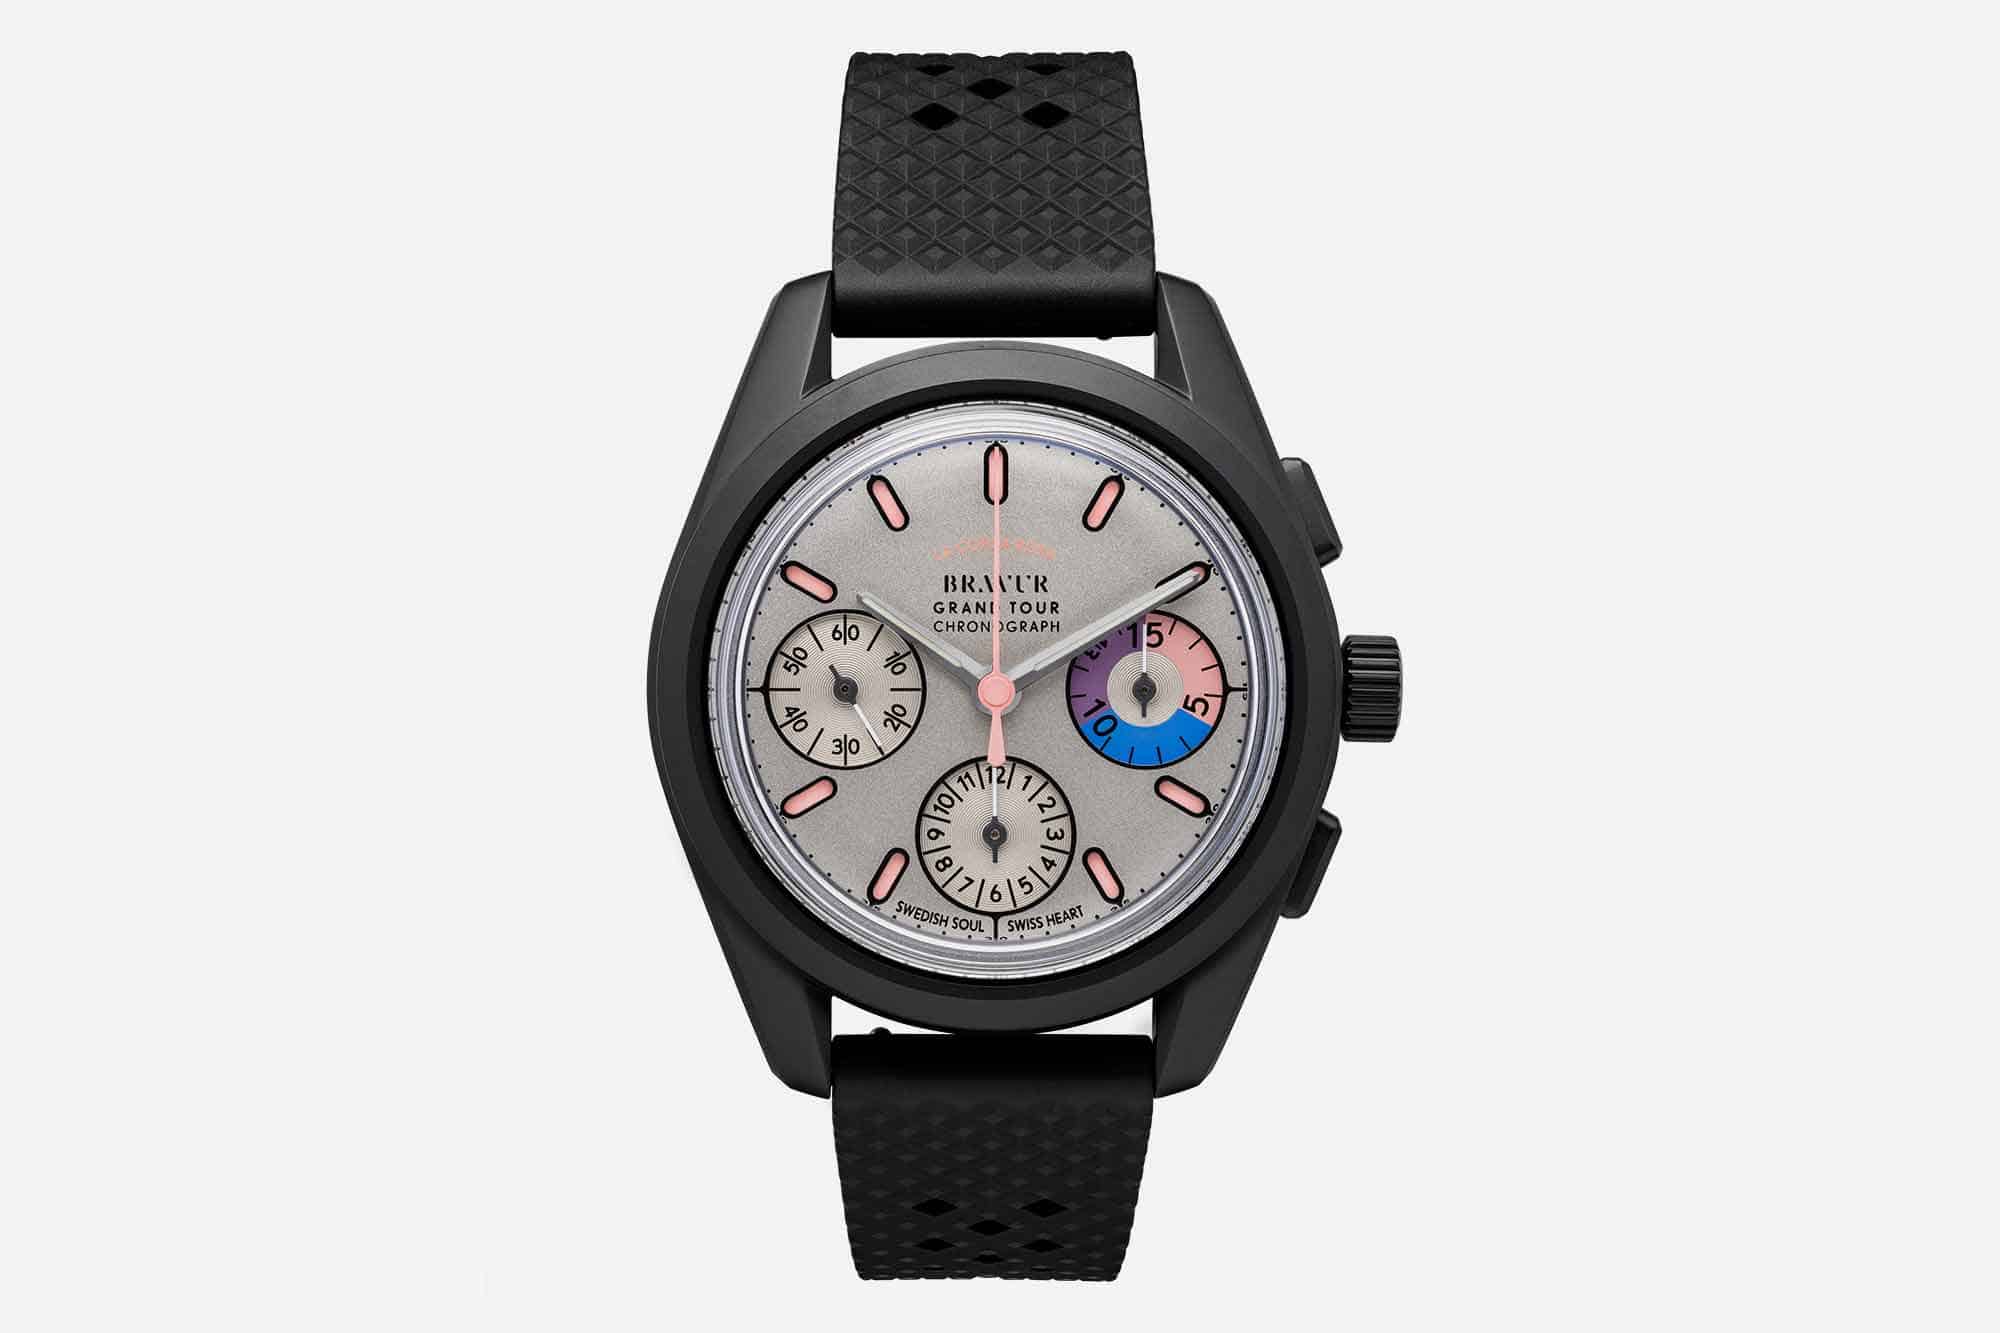 Bravur Unveils a New Cycling Inspired Watch, Just in Time for Italy’s Giro d?Italia